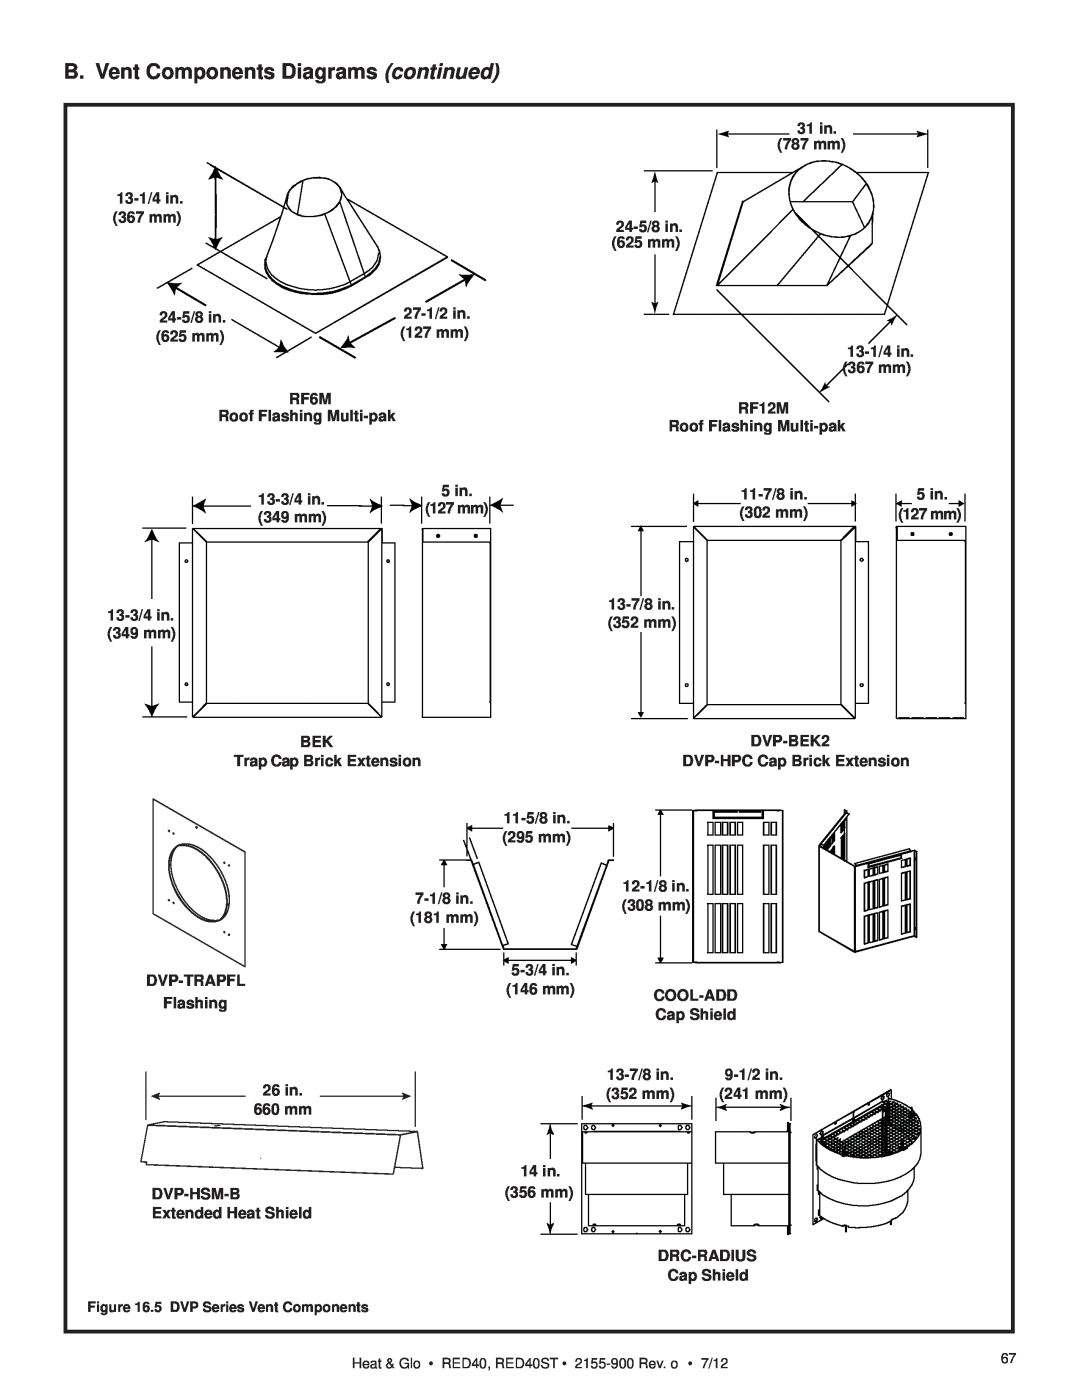 Heat & Glo LifeStyle RED40ST owner manual B. Vent Components Diagrams continued, 31 in 